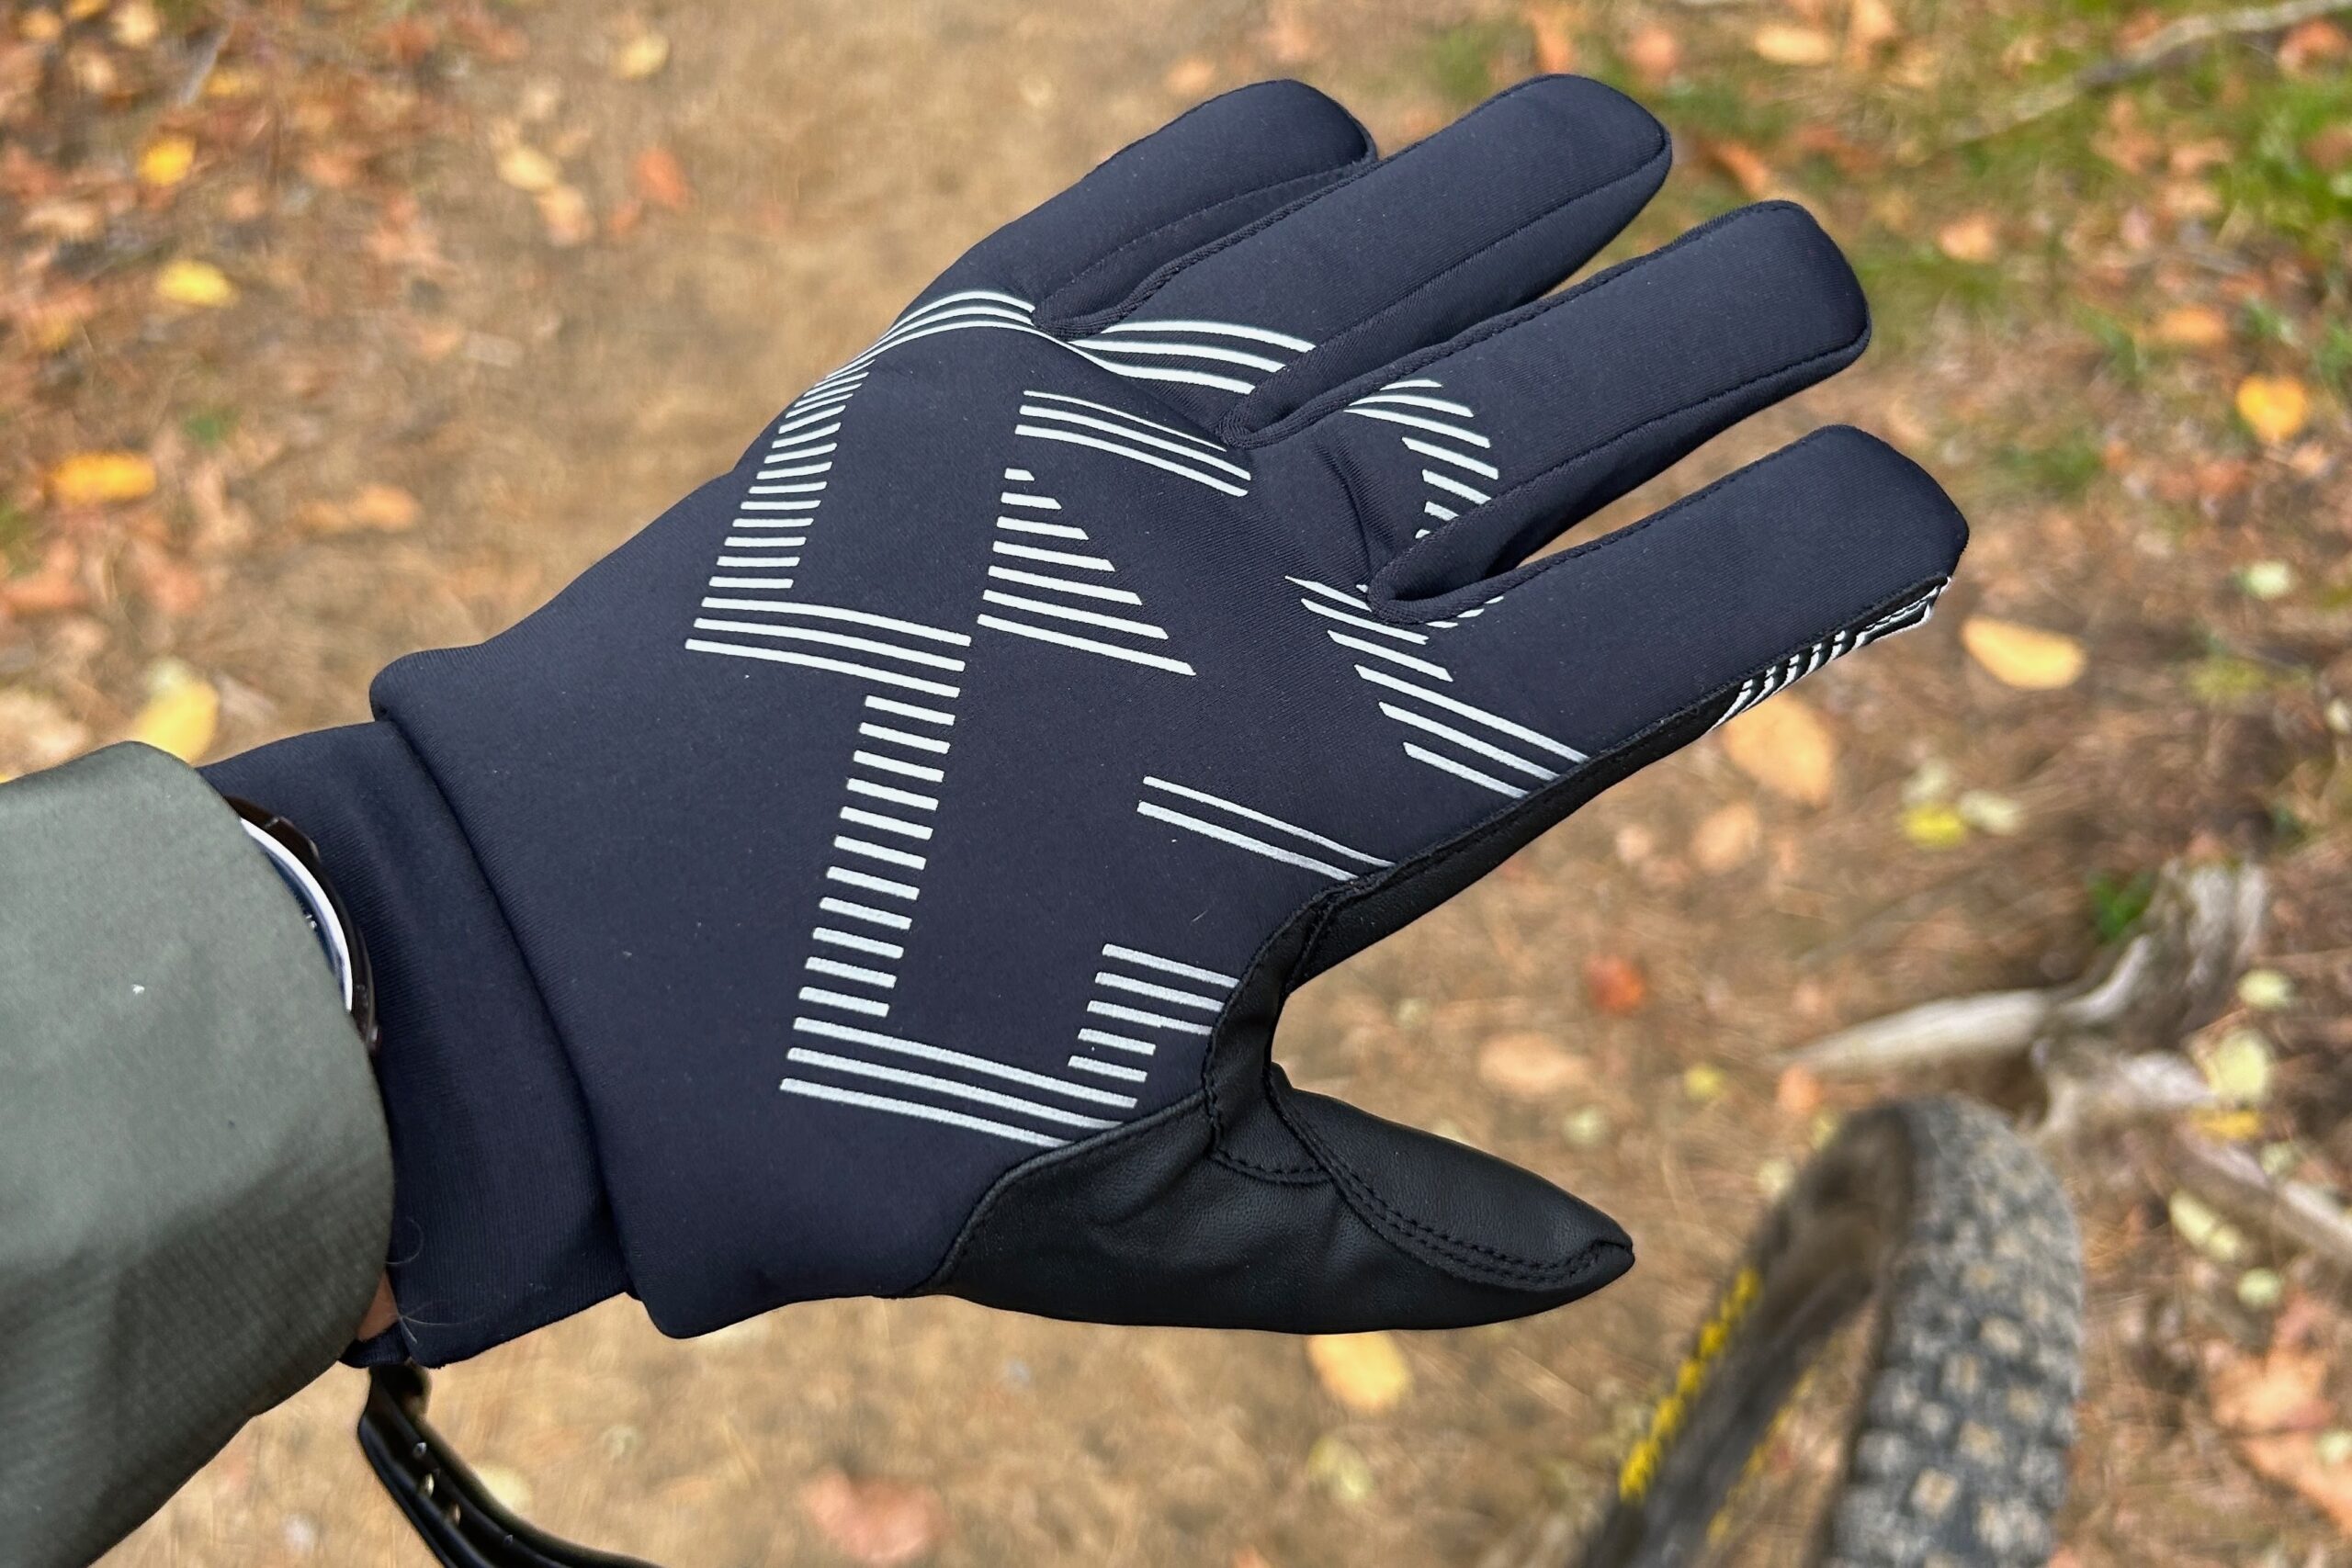 Wearing the Race Face Conspiracy cold weather mountain bike gloves